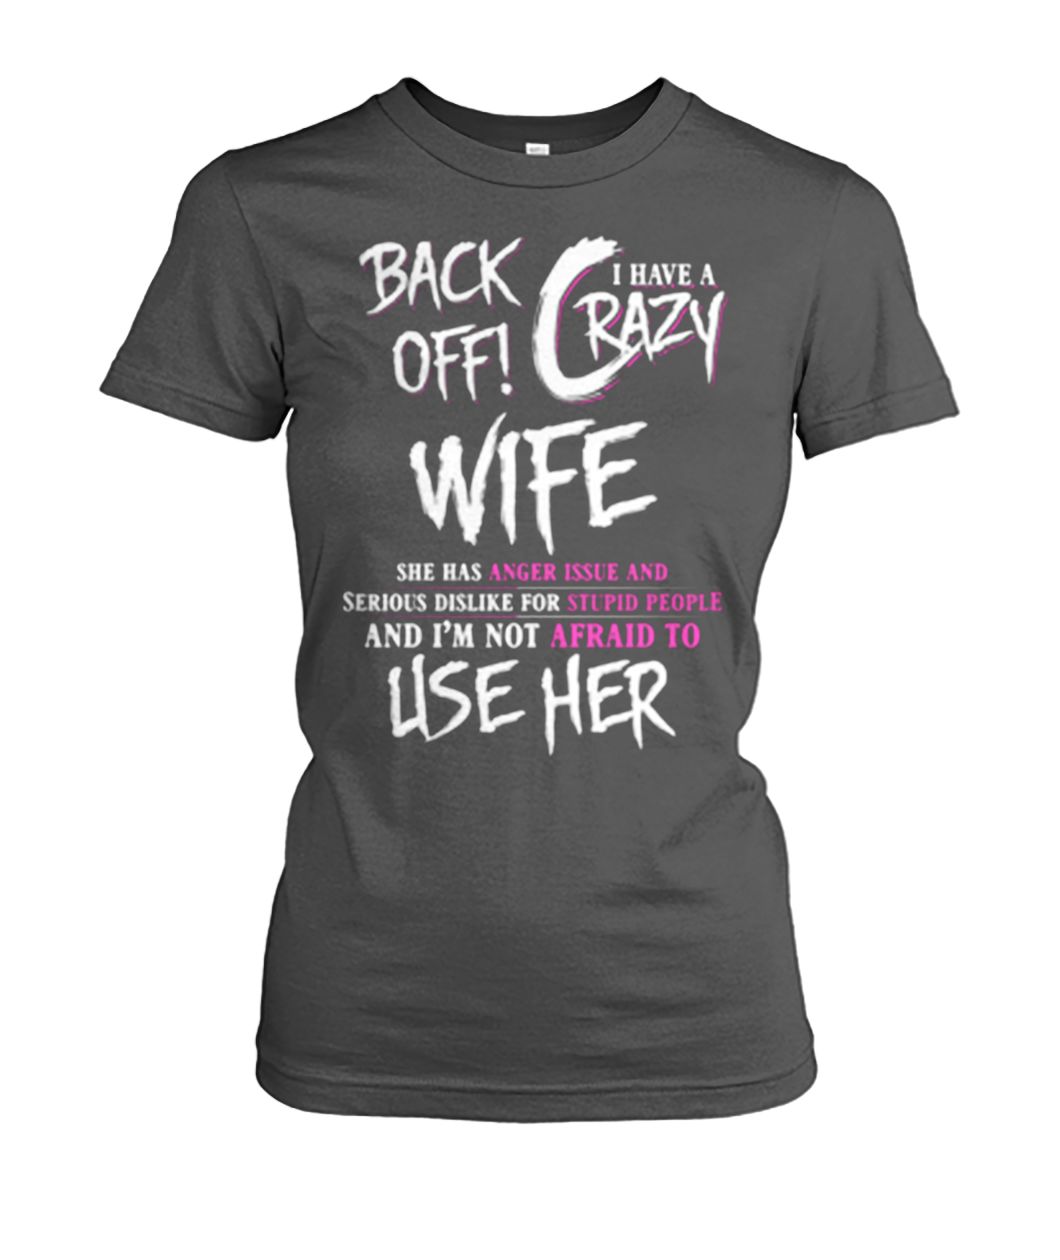 Back off I have a crazy sister she has anger issues women's crew tee